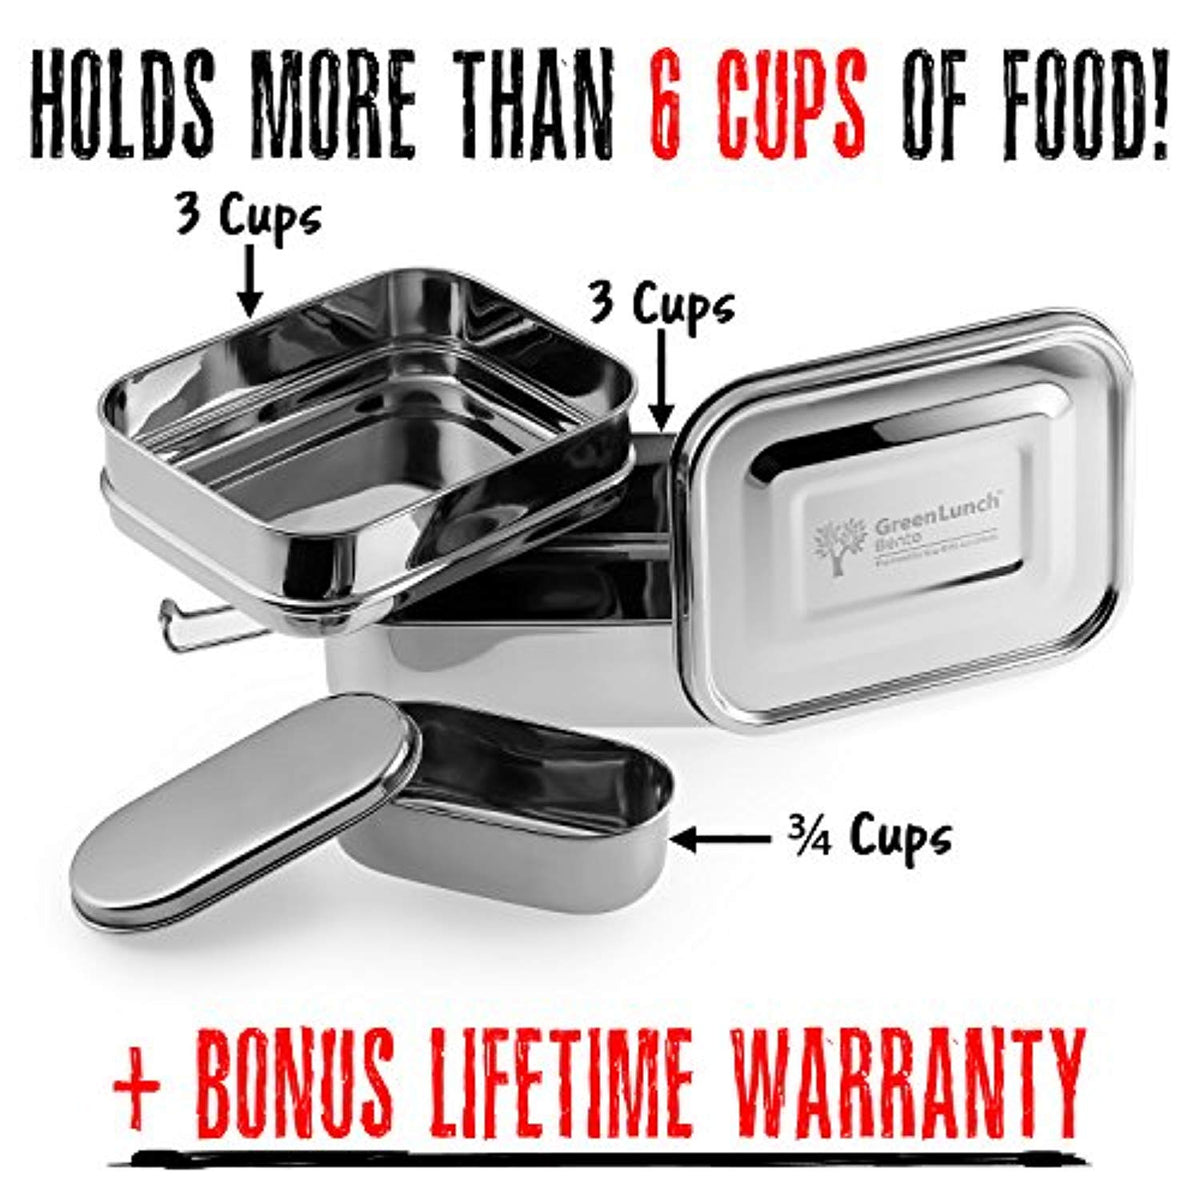  HOLIPOT Lunch Box Stainless Steel with 3 Compartments